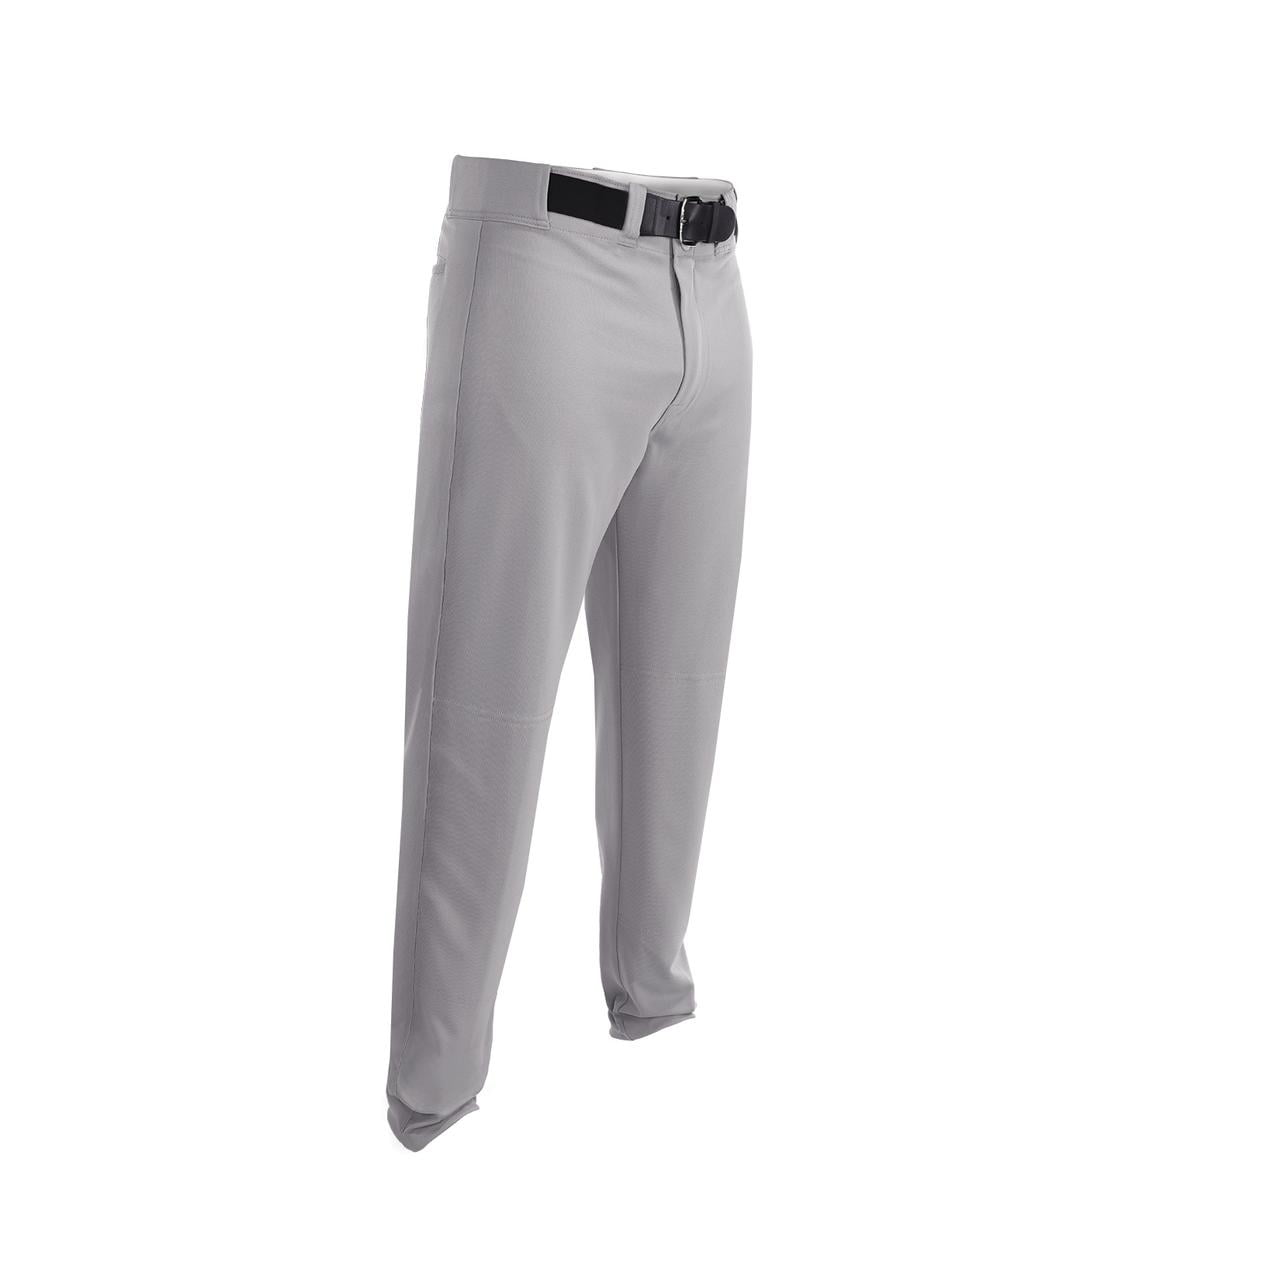 Easton Pro Youth Pull Up Baseball Pants Gray *NEW WITH TAGS* Ships quick 